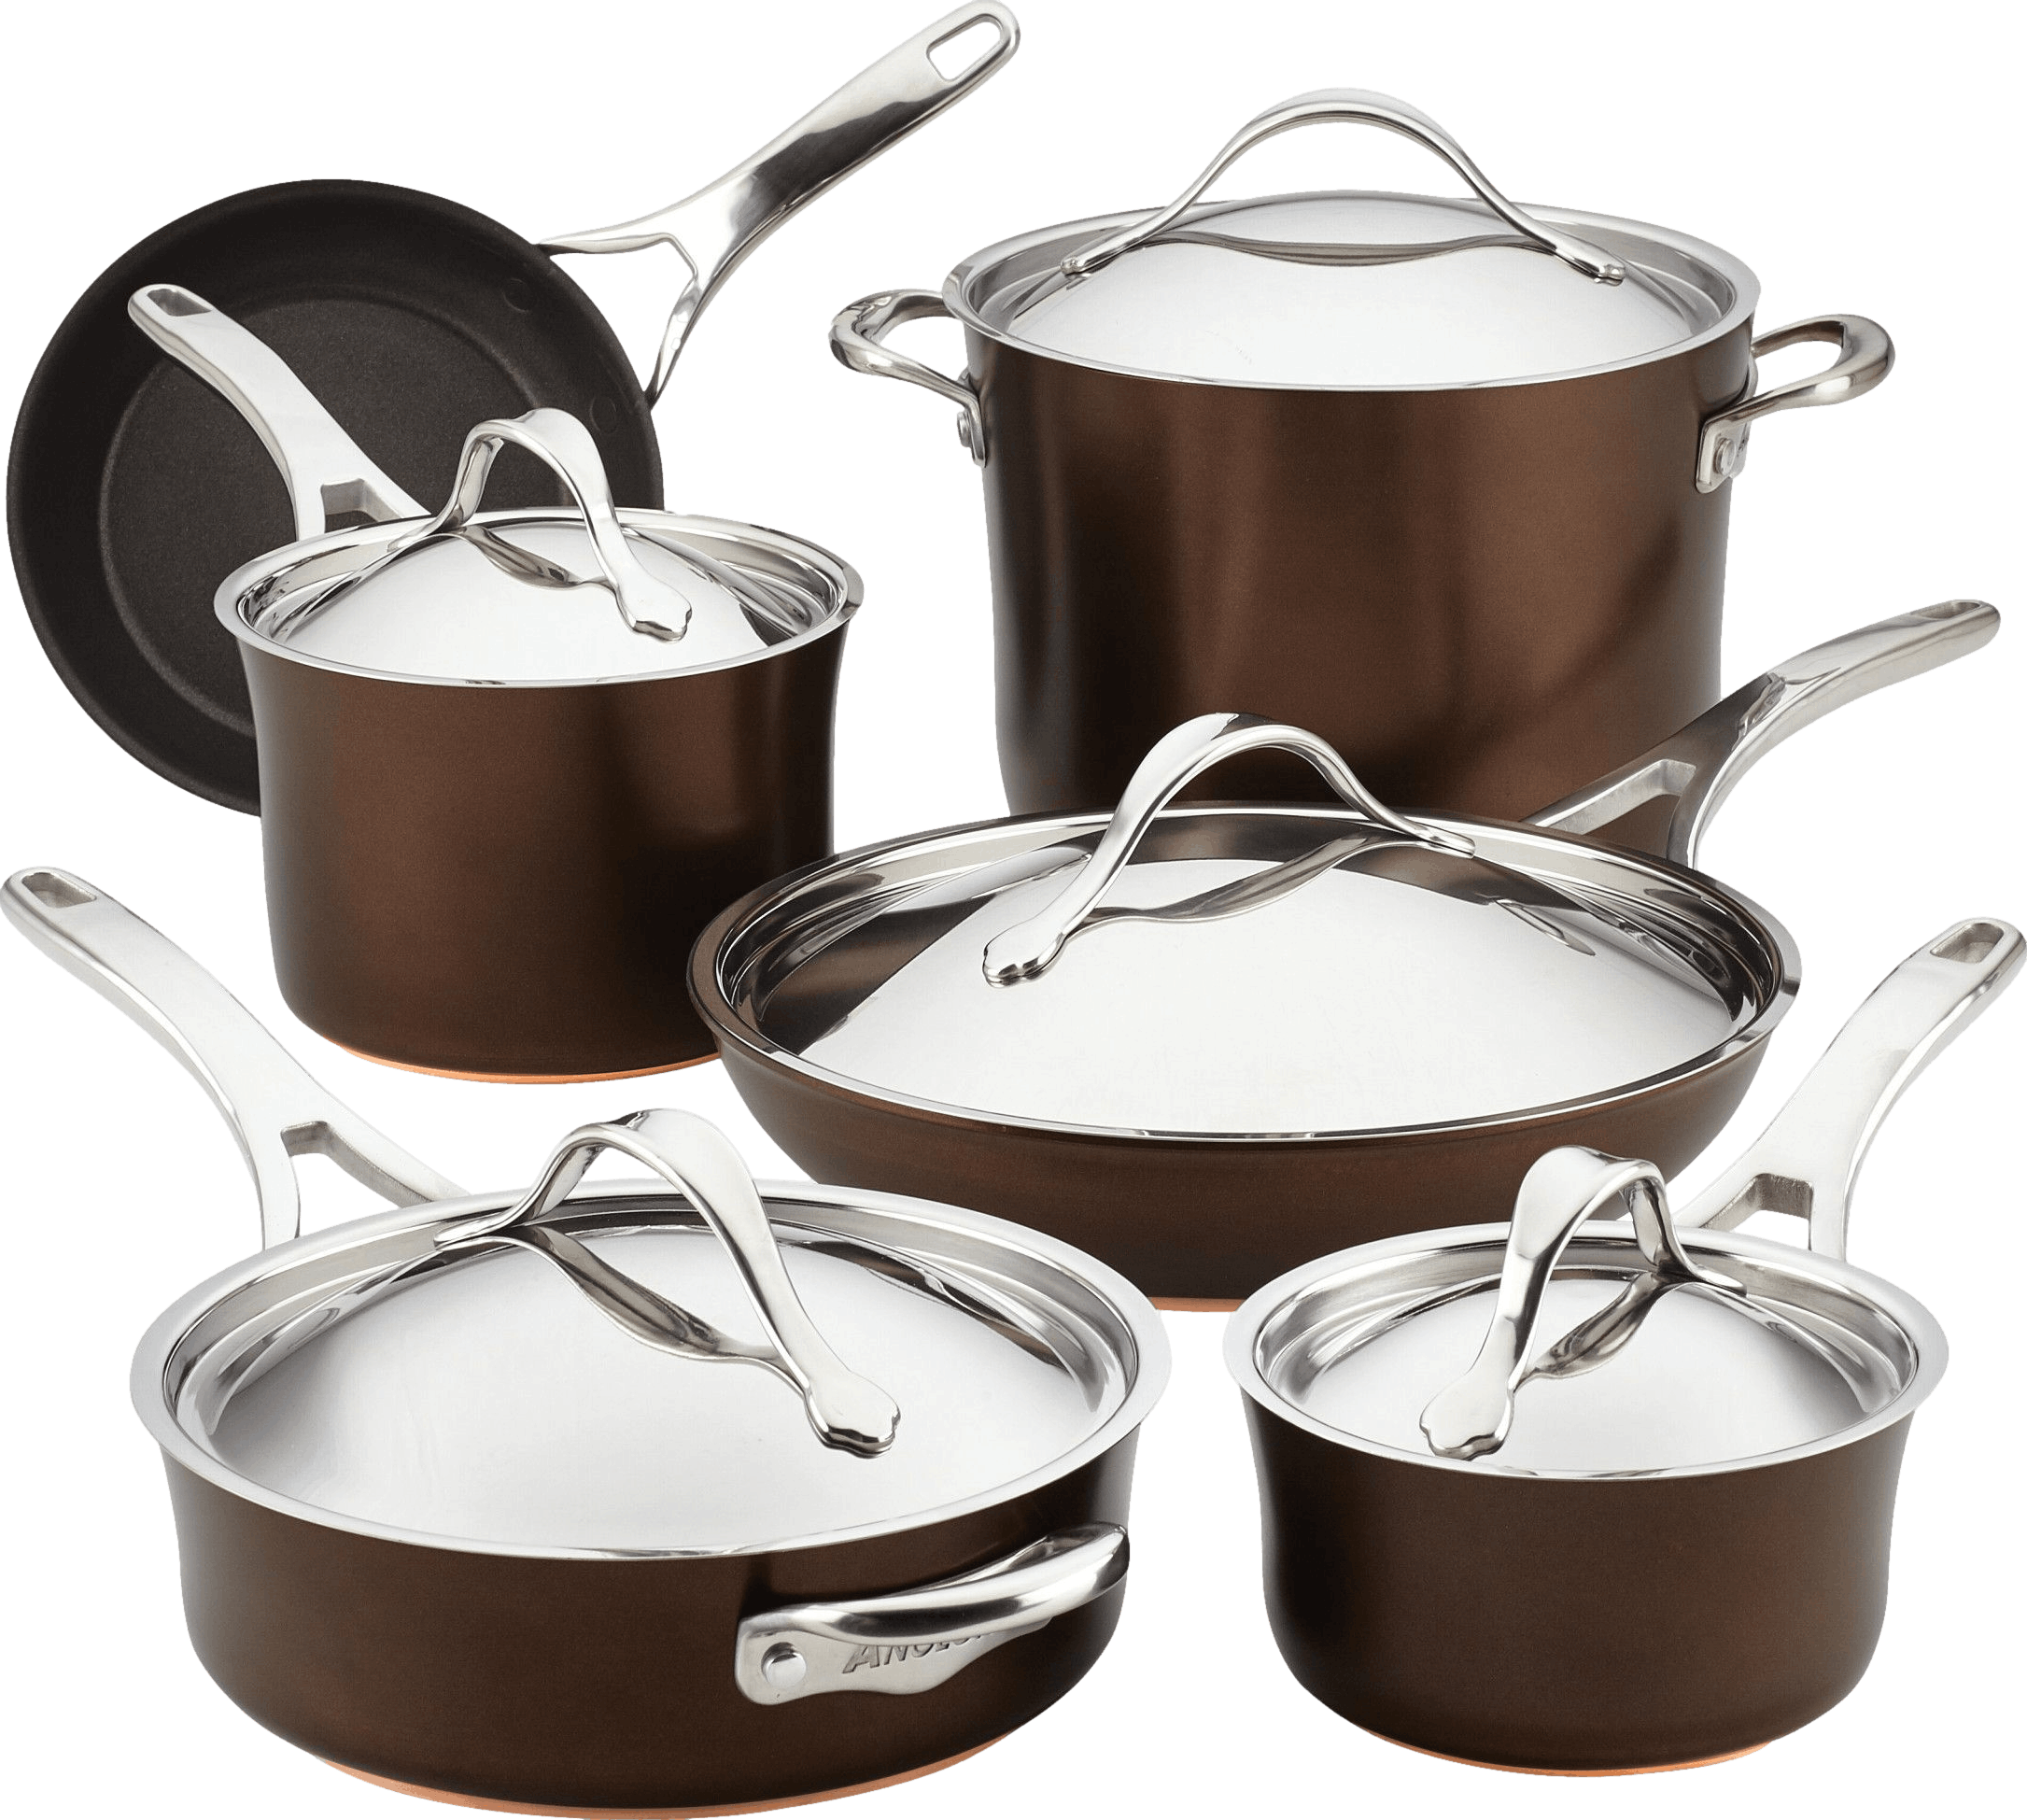 Anolon Advanced Home 11pc Hard Anodized Nonstick Cookware Set, Moonstone in  the Cooking Pans & Skillets department at